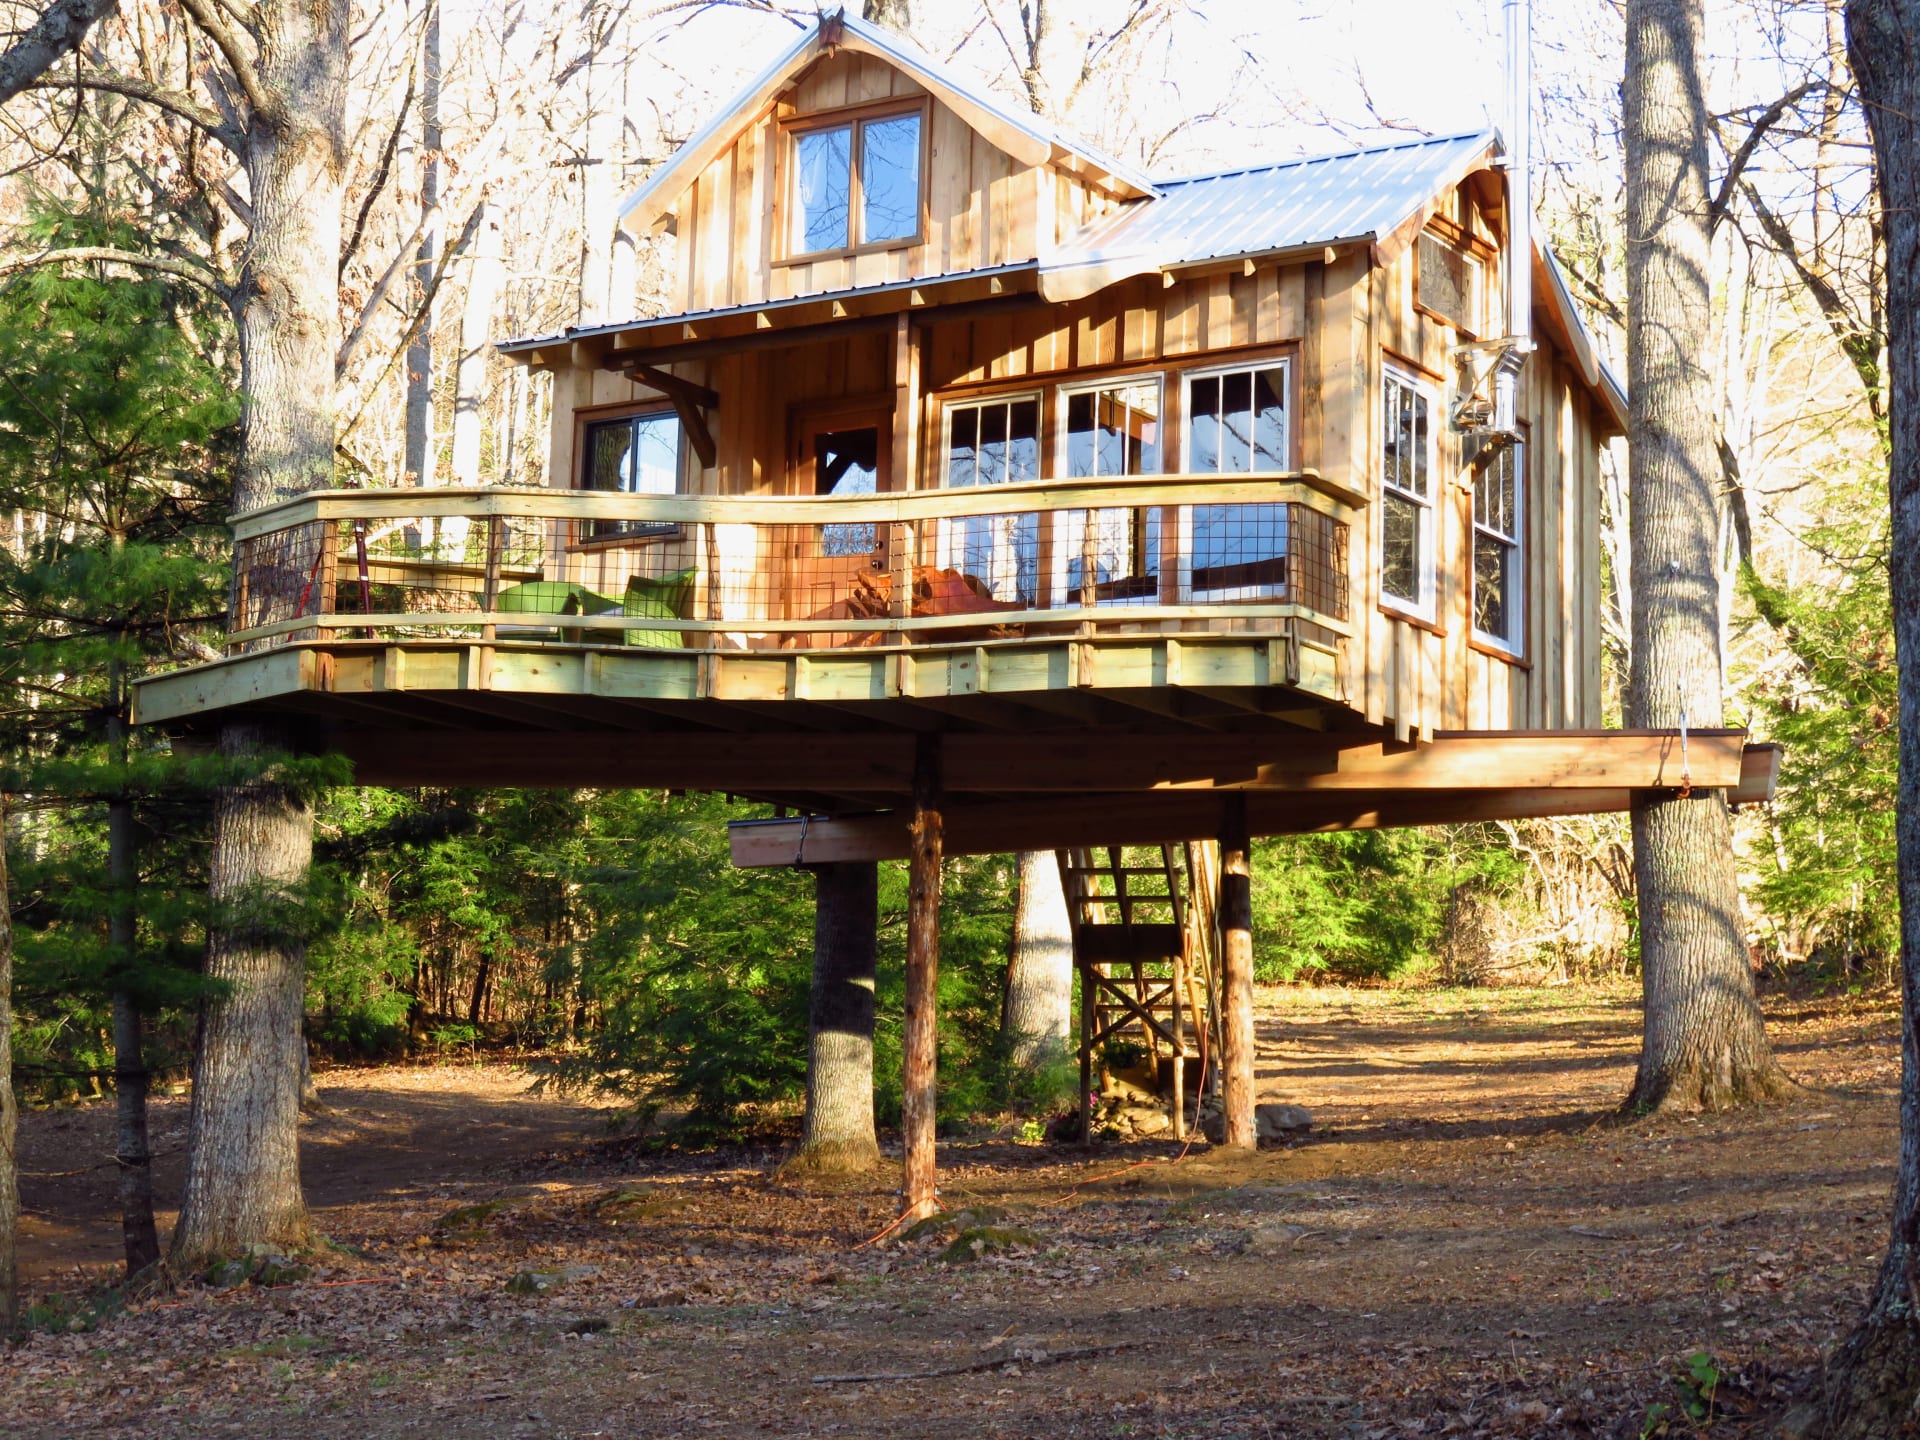 Celesterra is a 230 sq. ft. treehouse that is used solely for spiritual retreats